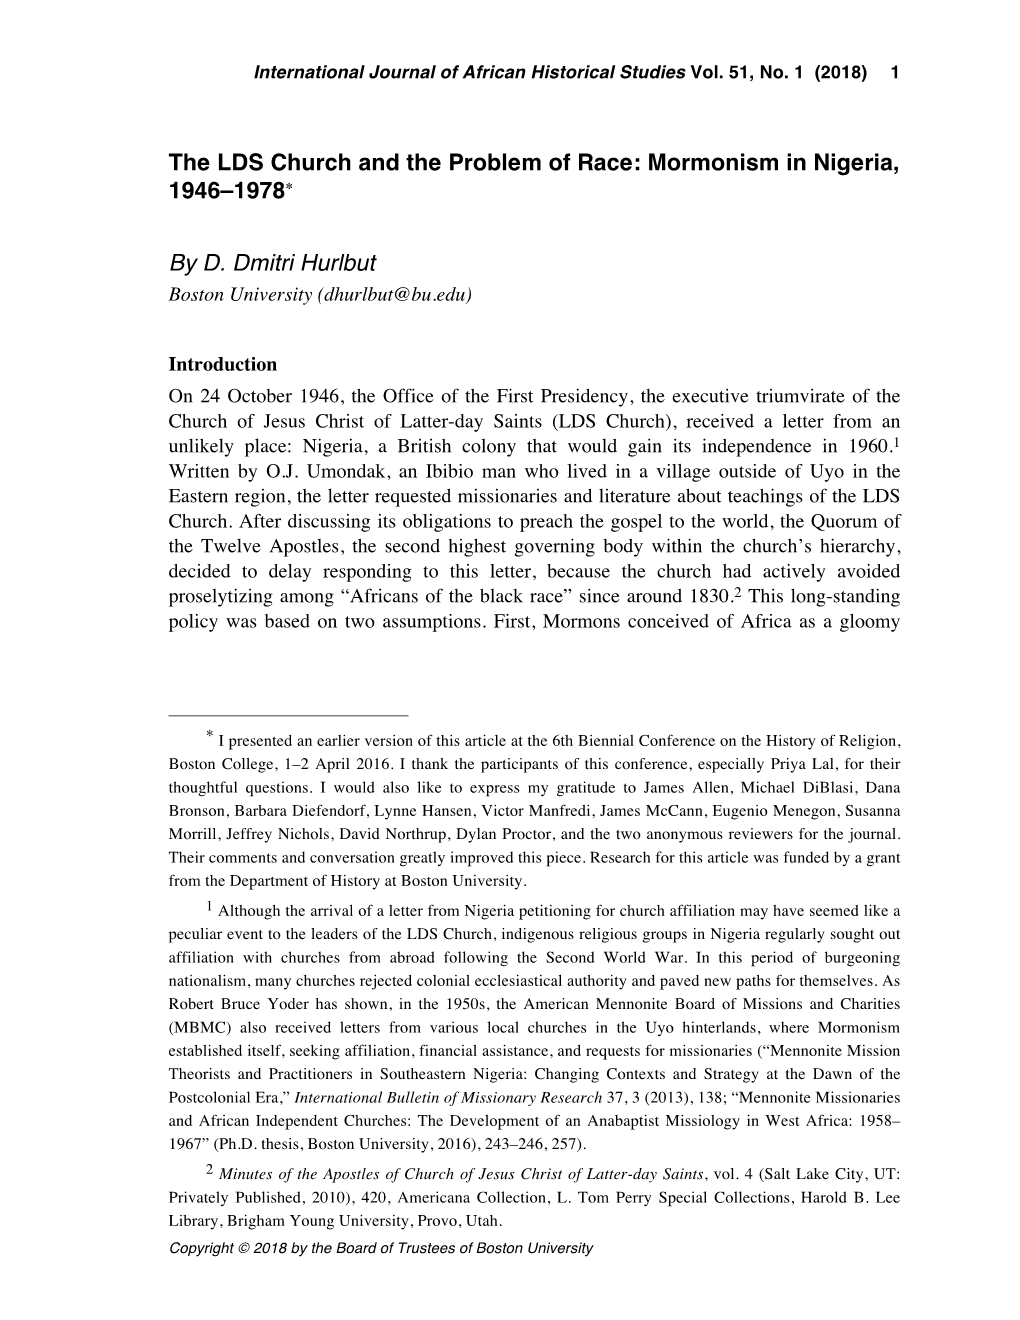 The LDS Church and the Problem of Race: Mormonism in Nigeria, 1946–1978* by D. Dmitri Hurlbut